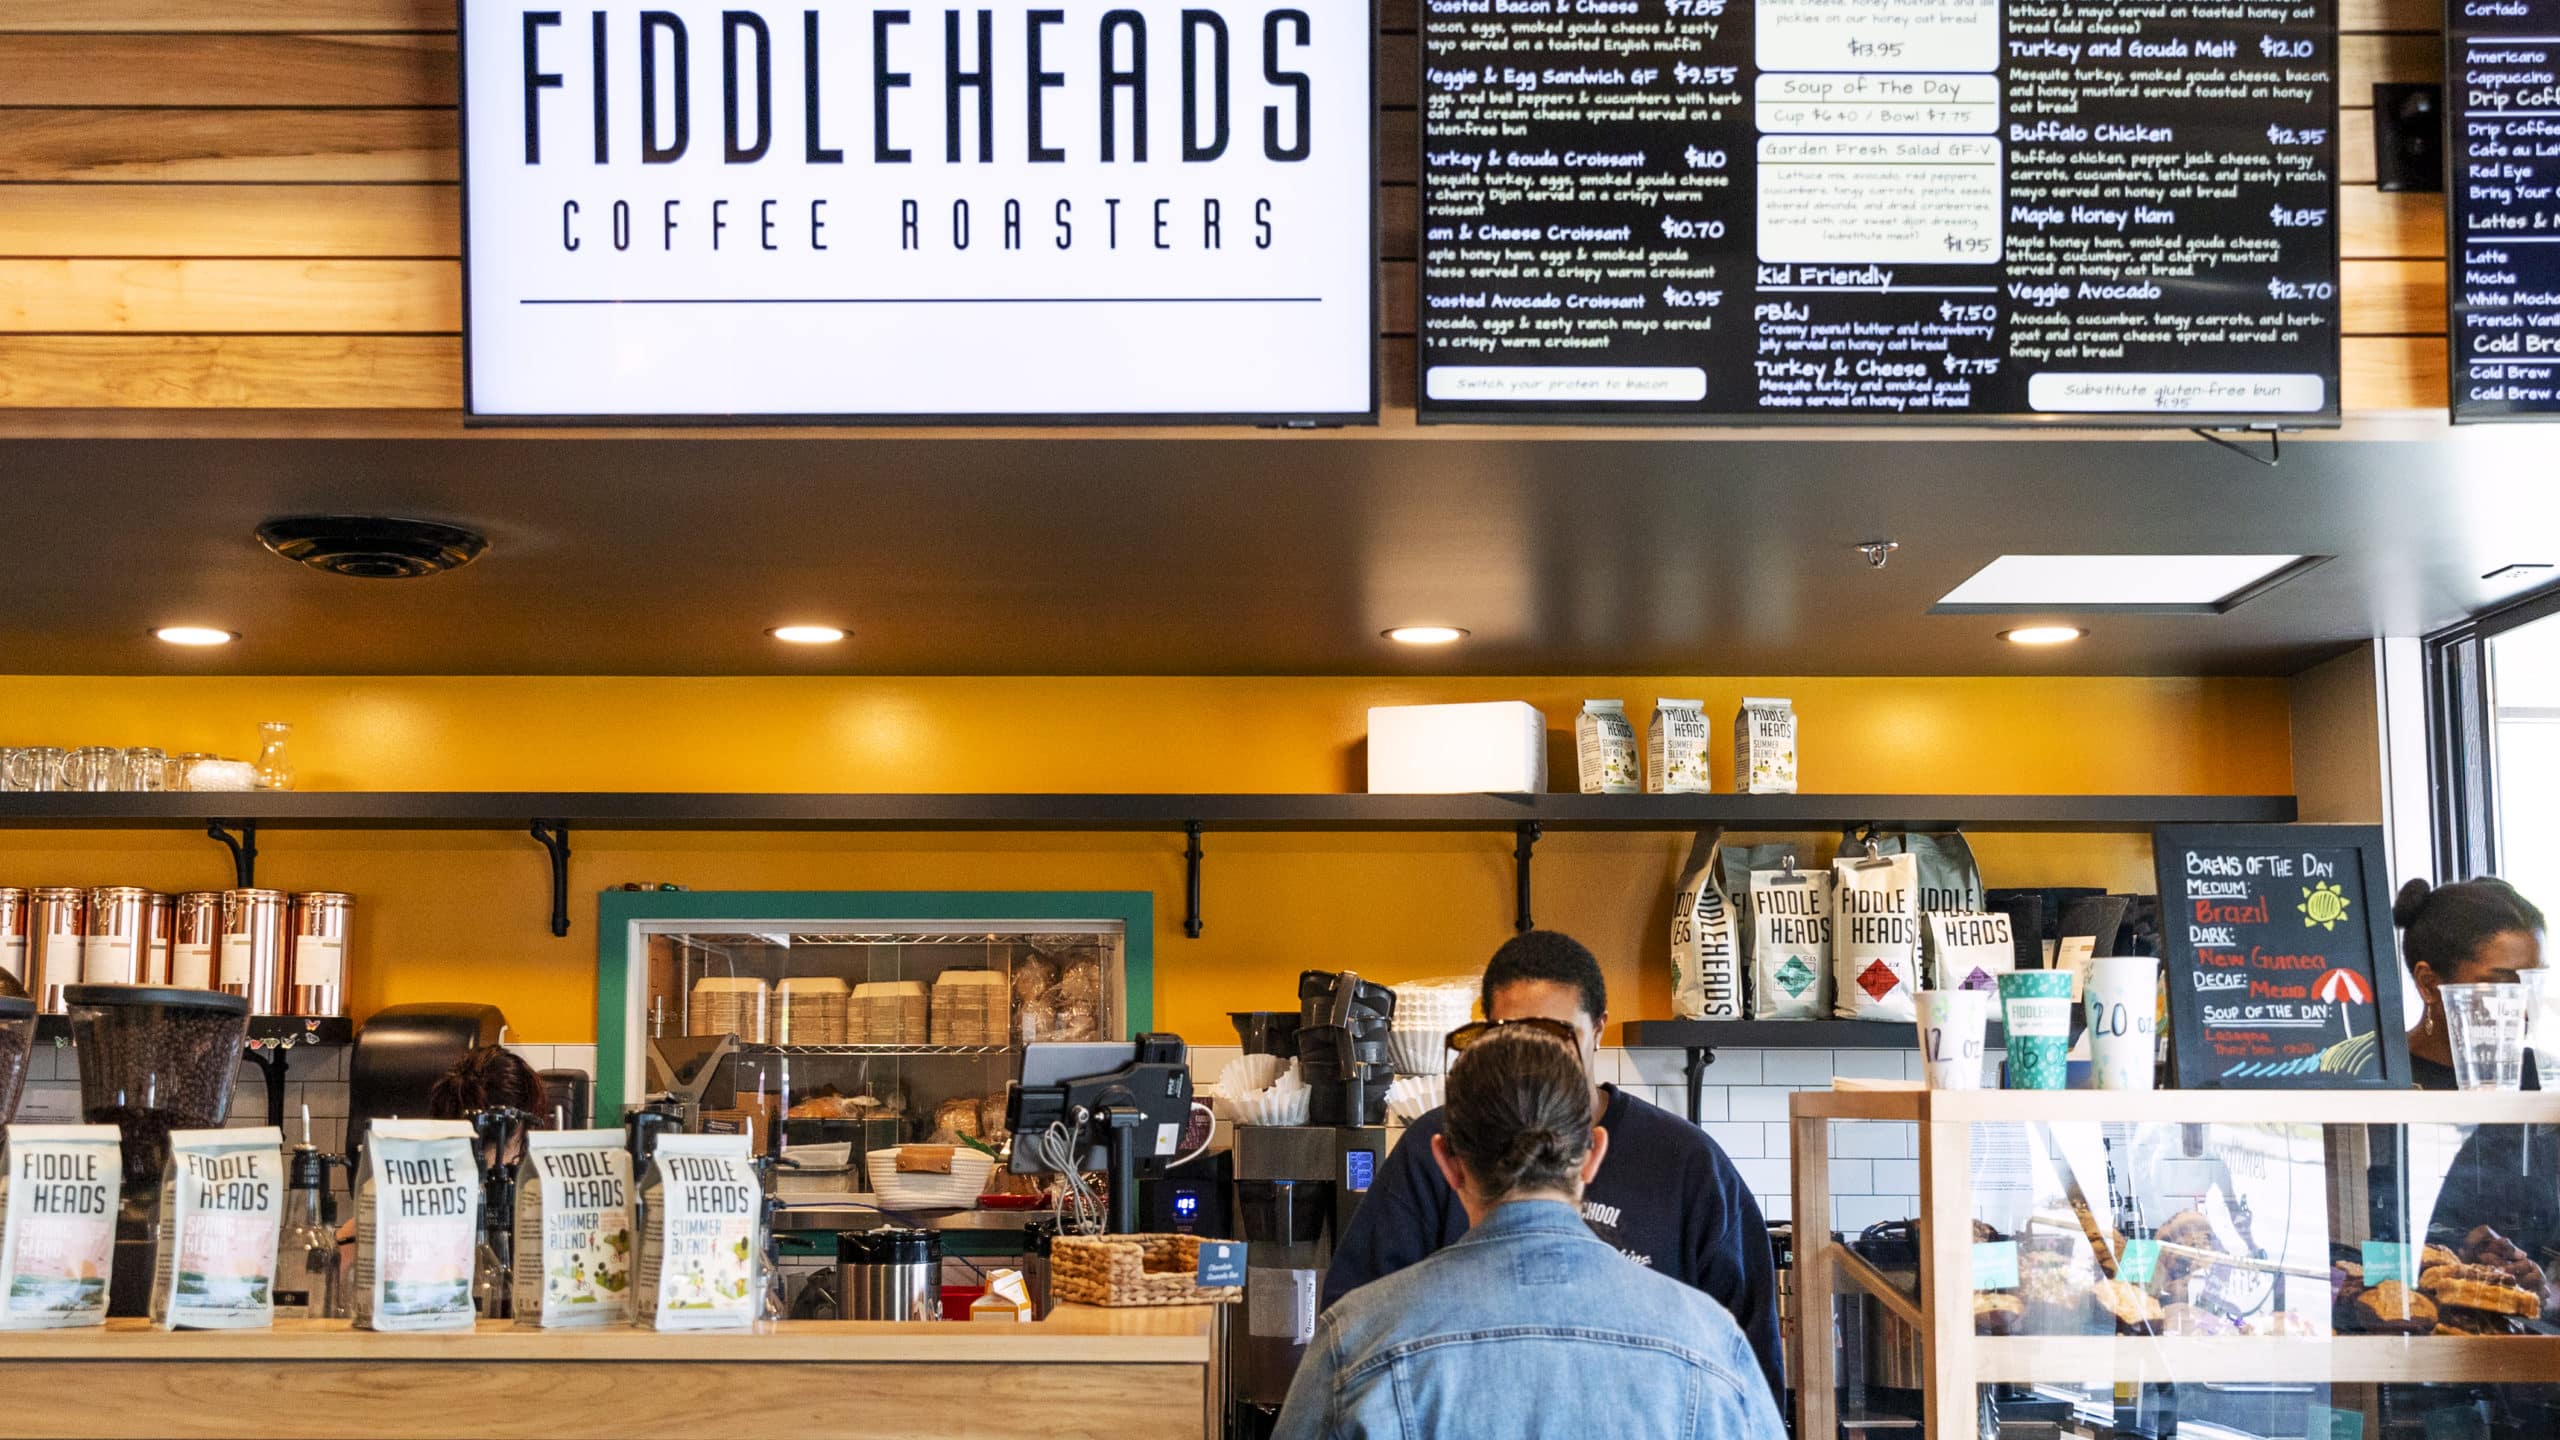 Interior of Fiddleheads Coffee Roasters in Wauwatosa, WI